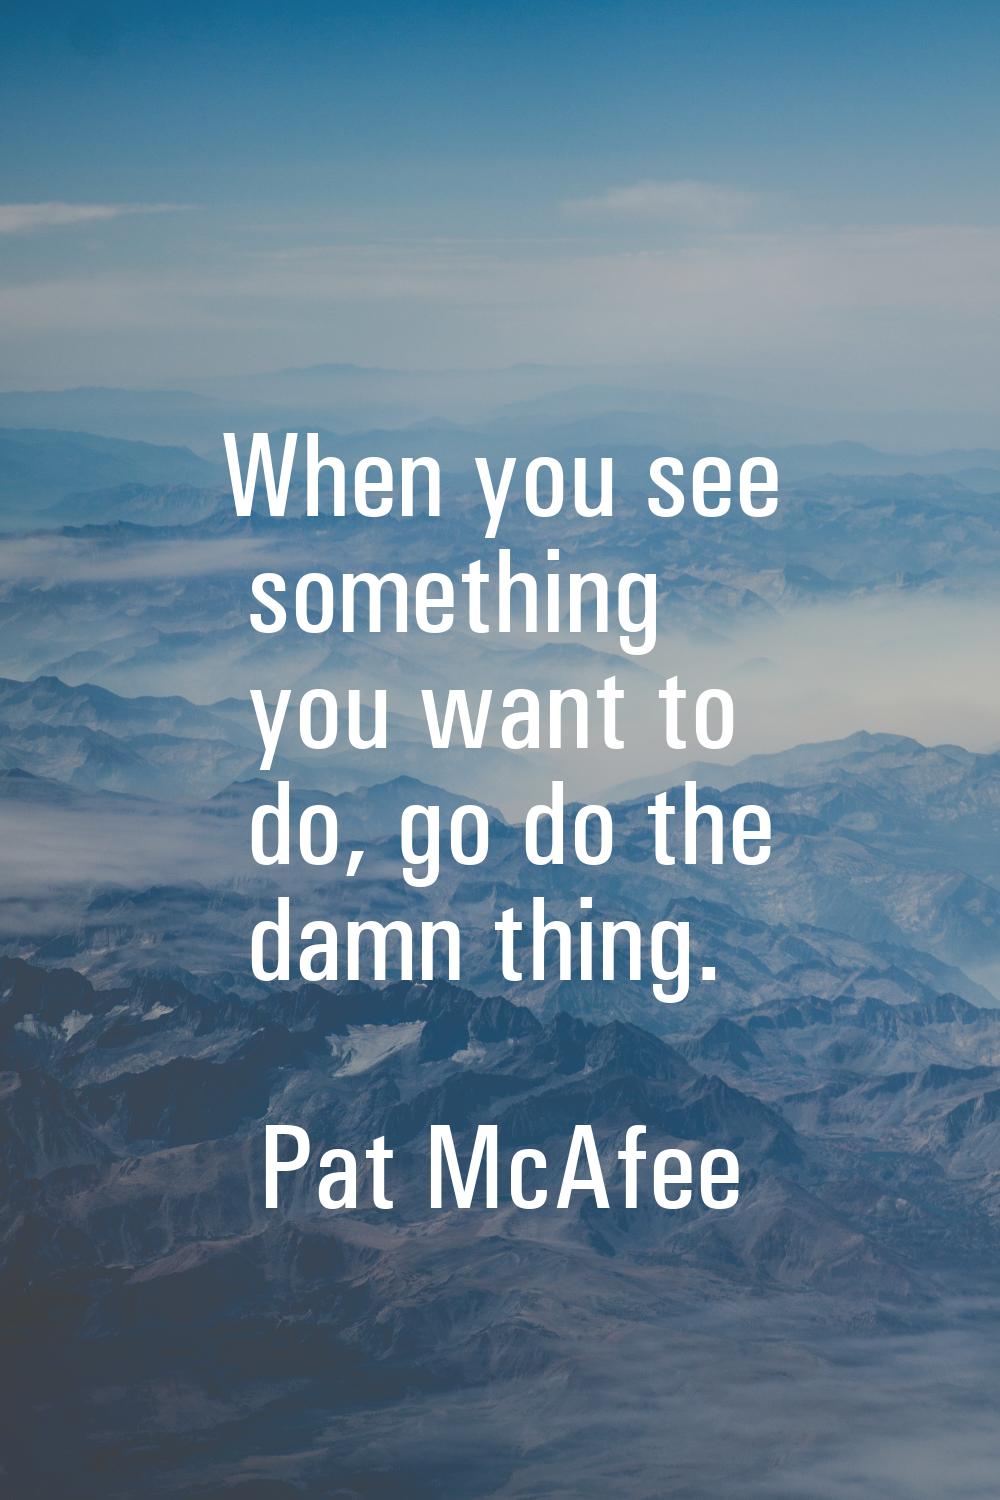 When you see something you want to do, go do the damn thing.